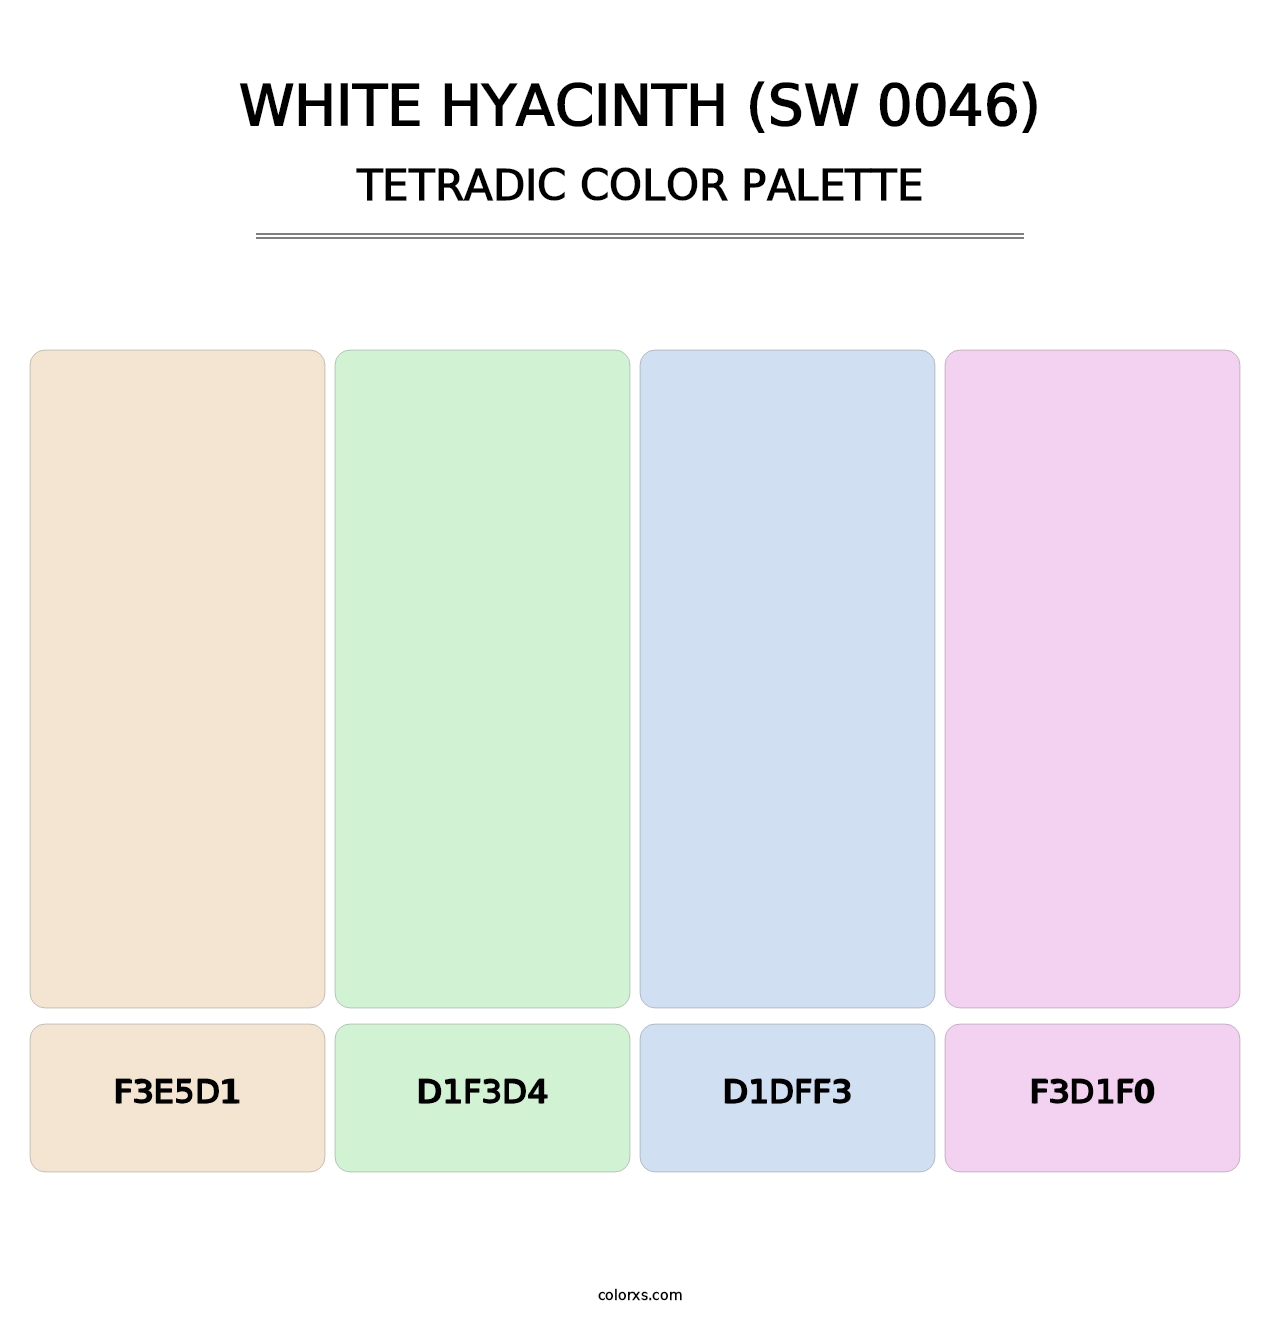 White Hyacinth (SW 0046) - Tetradic Color Palette